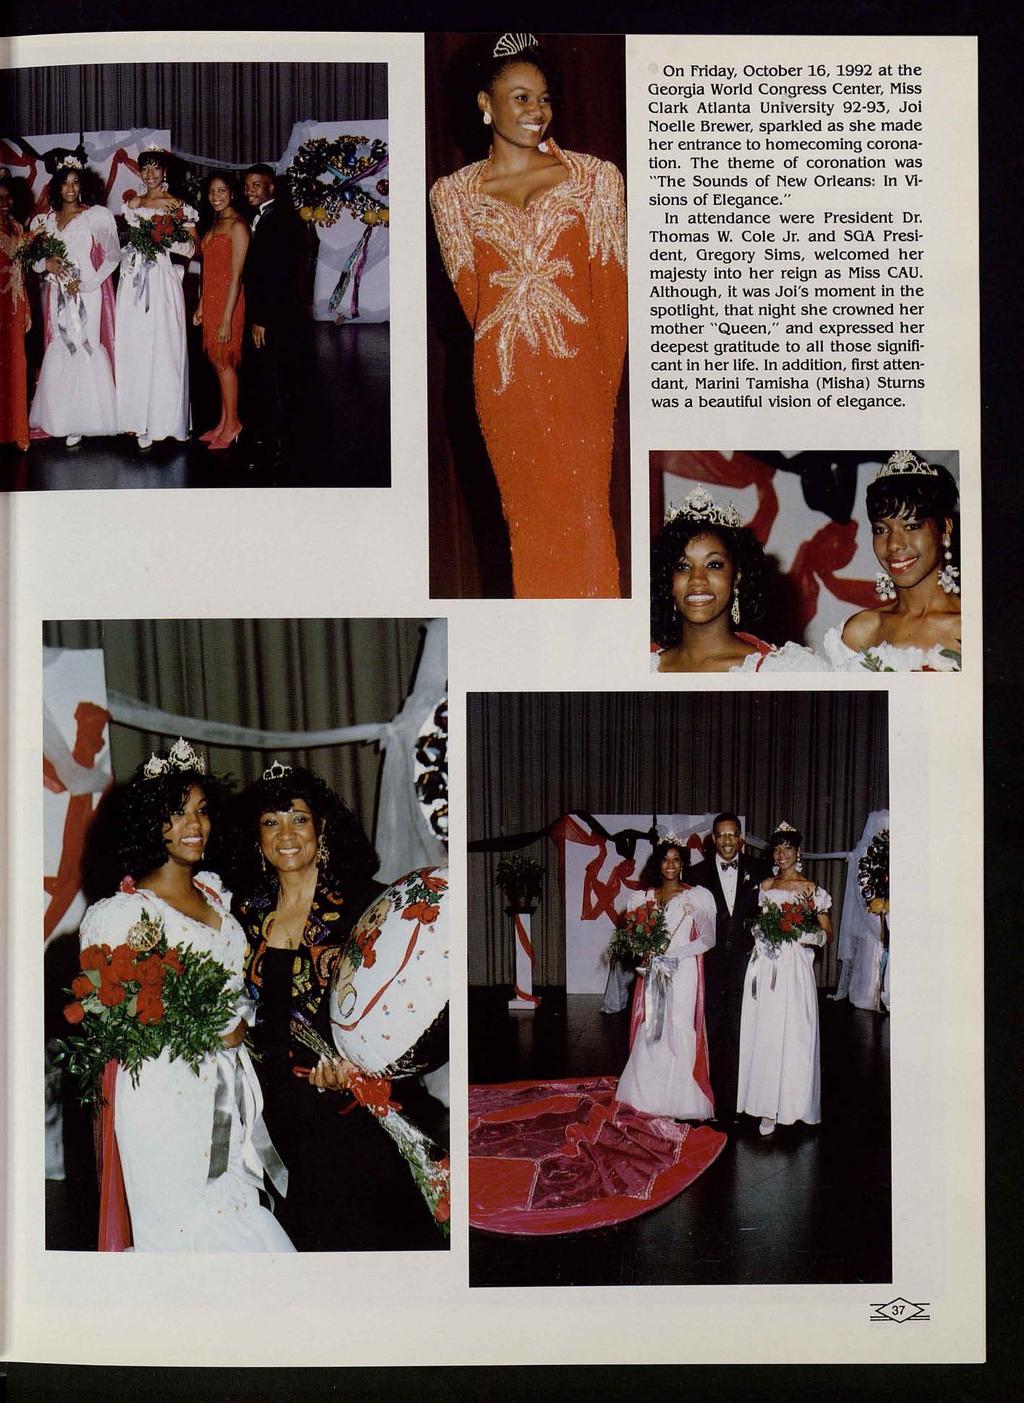 On Friday, October 16, 1992 at the Georgia World Congress Center, Miss Clark Atlanta University 92-9:3, Joi Noelle Brewer, sparkled as she made her entrance to homecoming coronation.